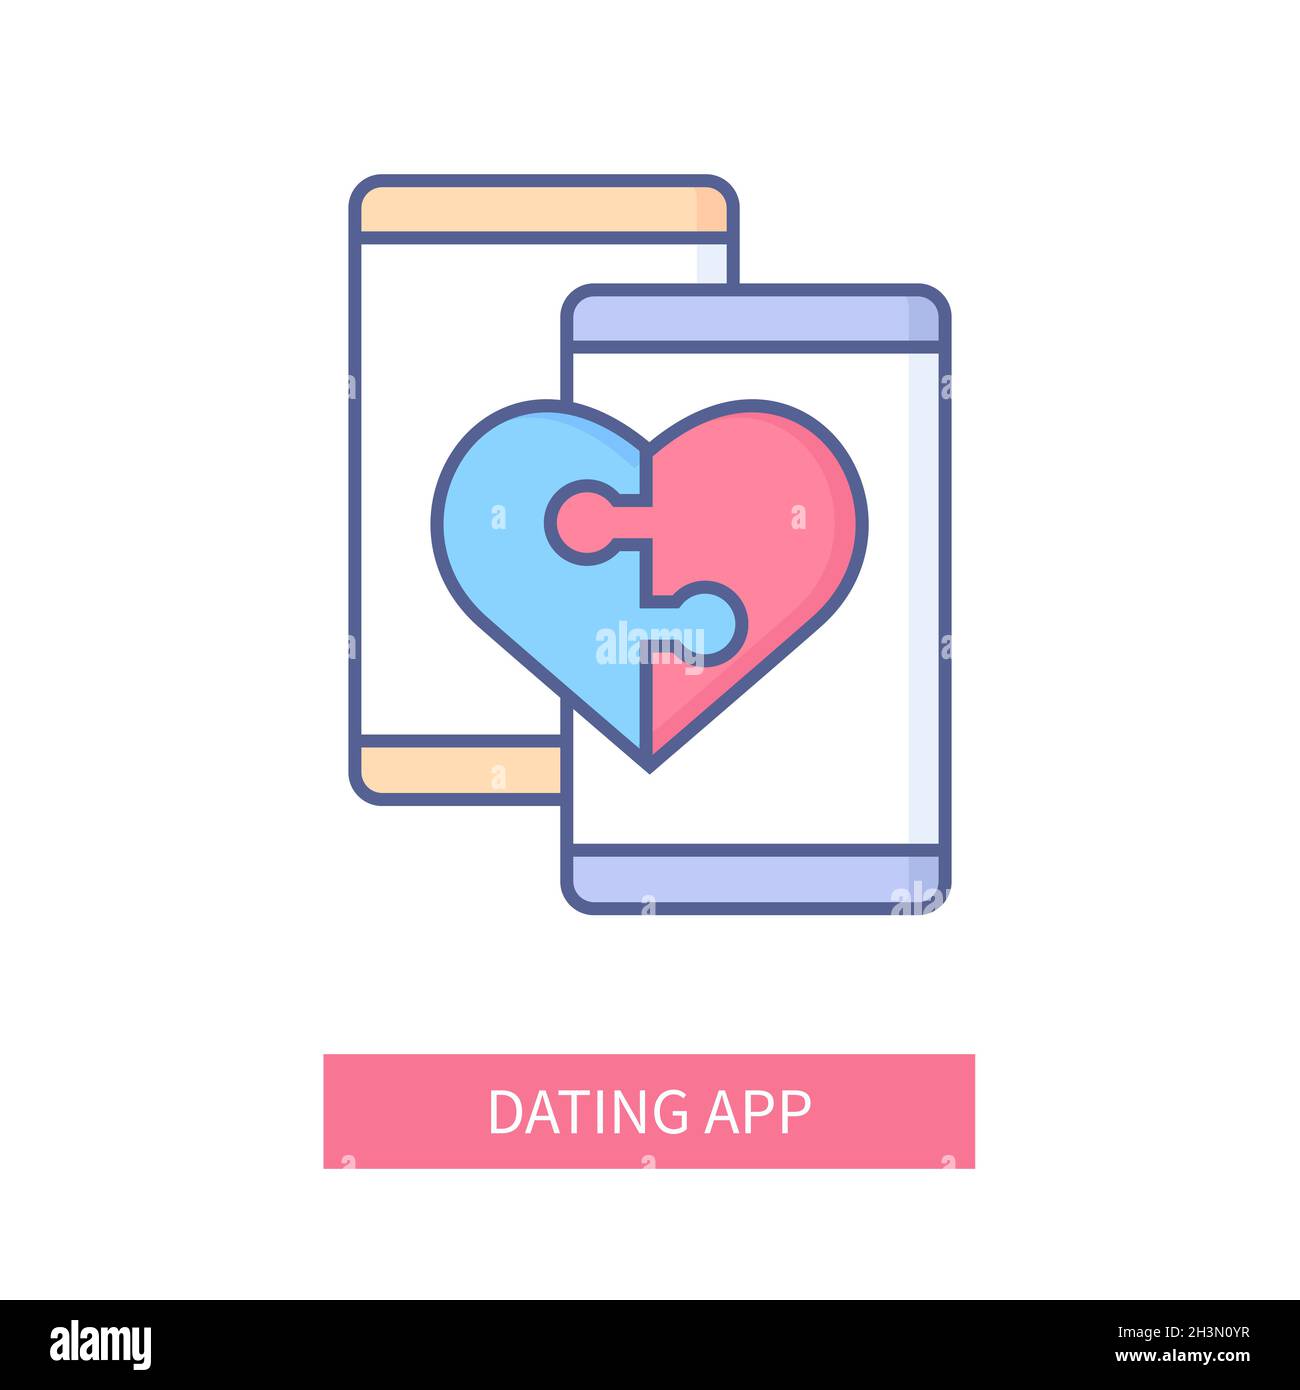 dating app with a heart icon